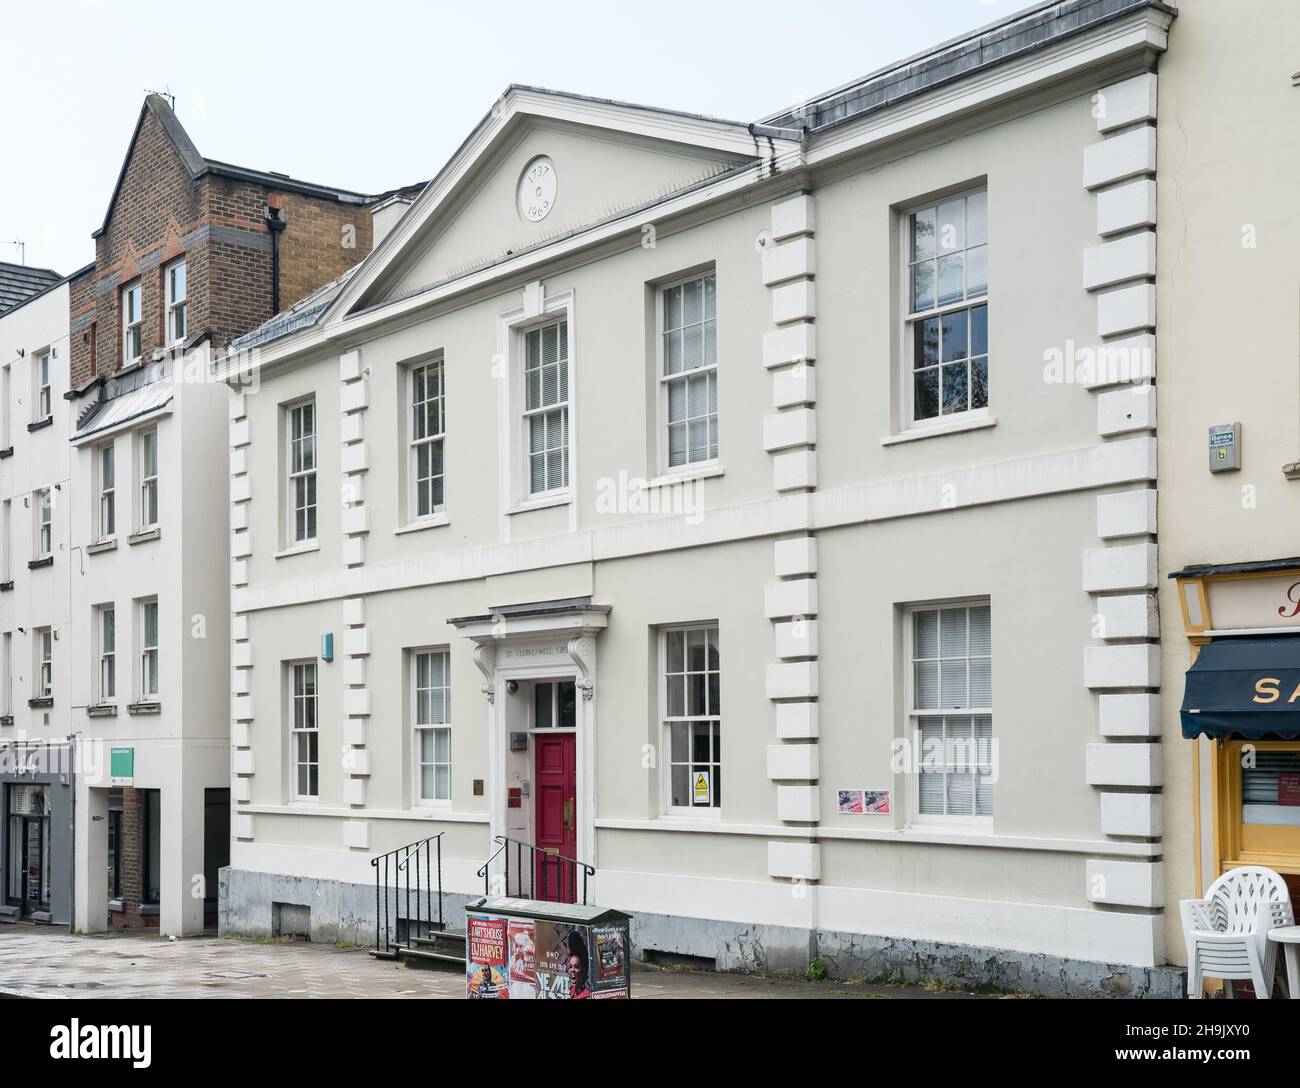 Views of the Karl Marx Memorial Library in Clerkenwell Green, London. It is the 200th anniversary of Marx's birth on May 6, 2018. Photo date: Wednesday, May 2, 2018. Photo credit should read: Richard Gray/EMPICS Stock Photo